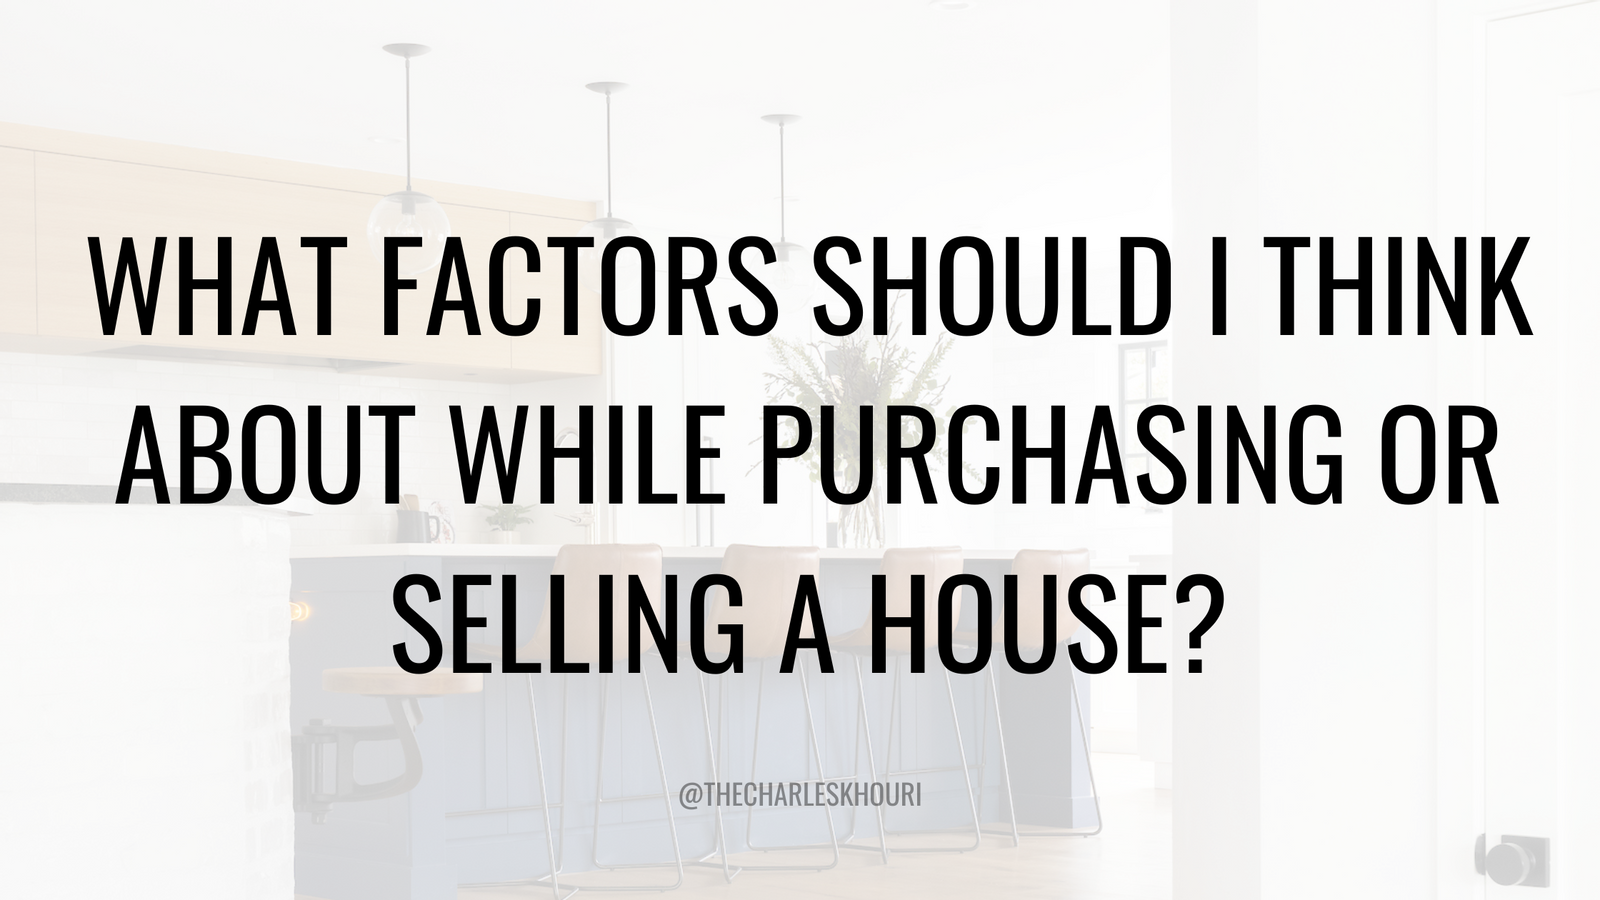 What factors should I think about while purchasing or selling a house?